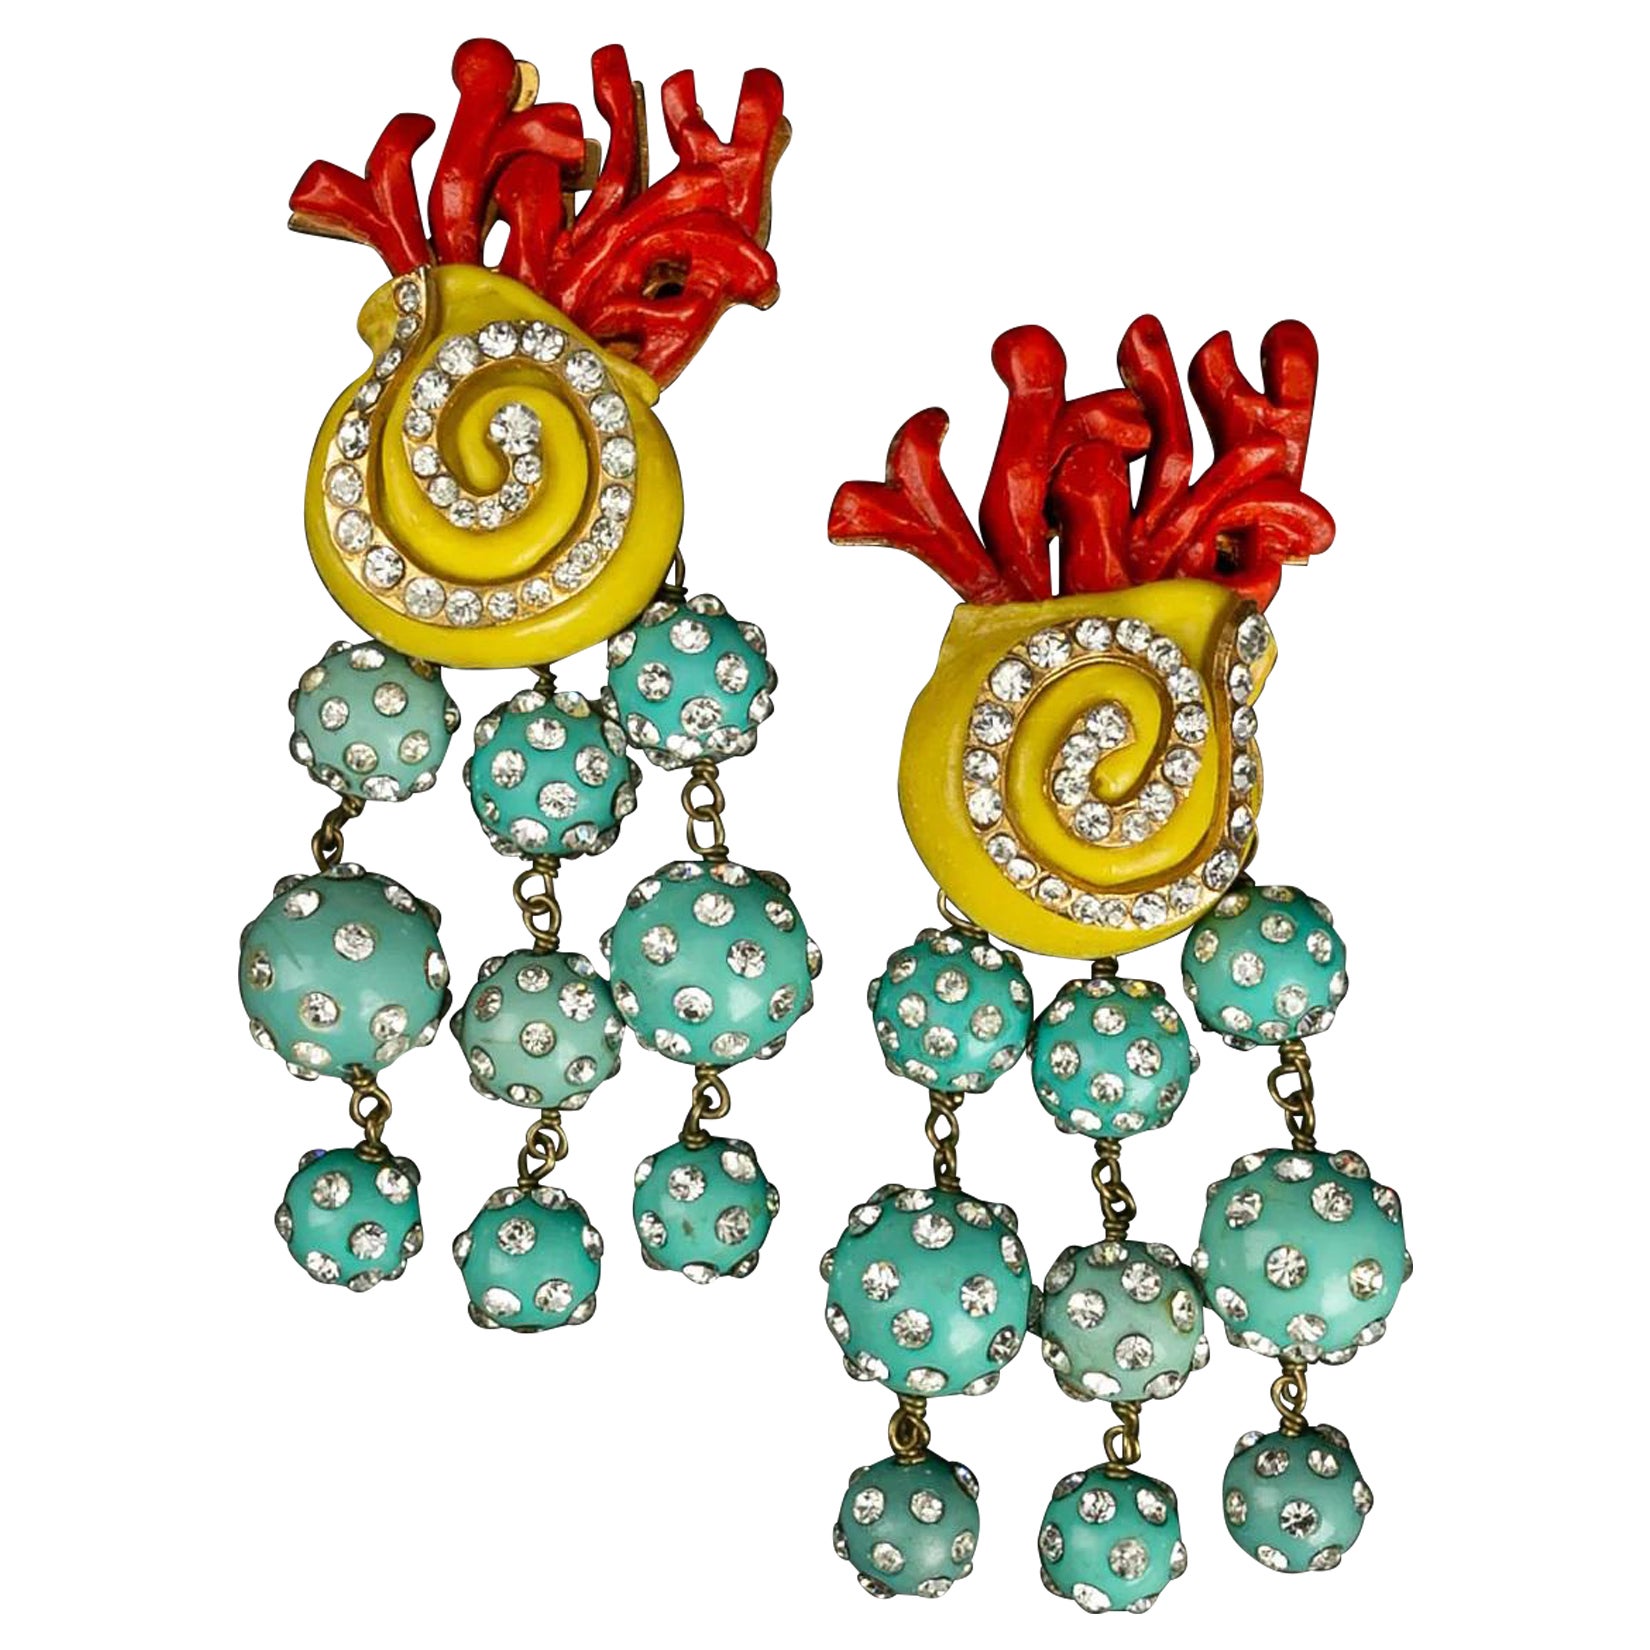 Christian Lacroix "Under the Sea" Clip-on Earrings Made of Gilted Metal